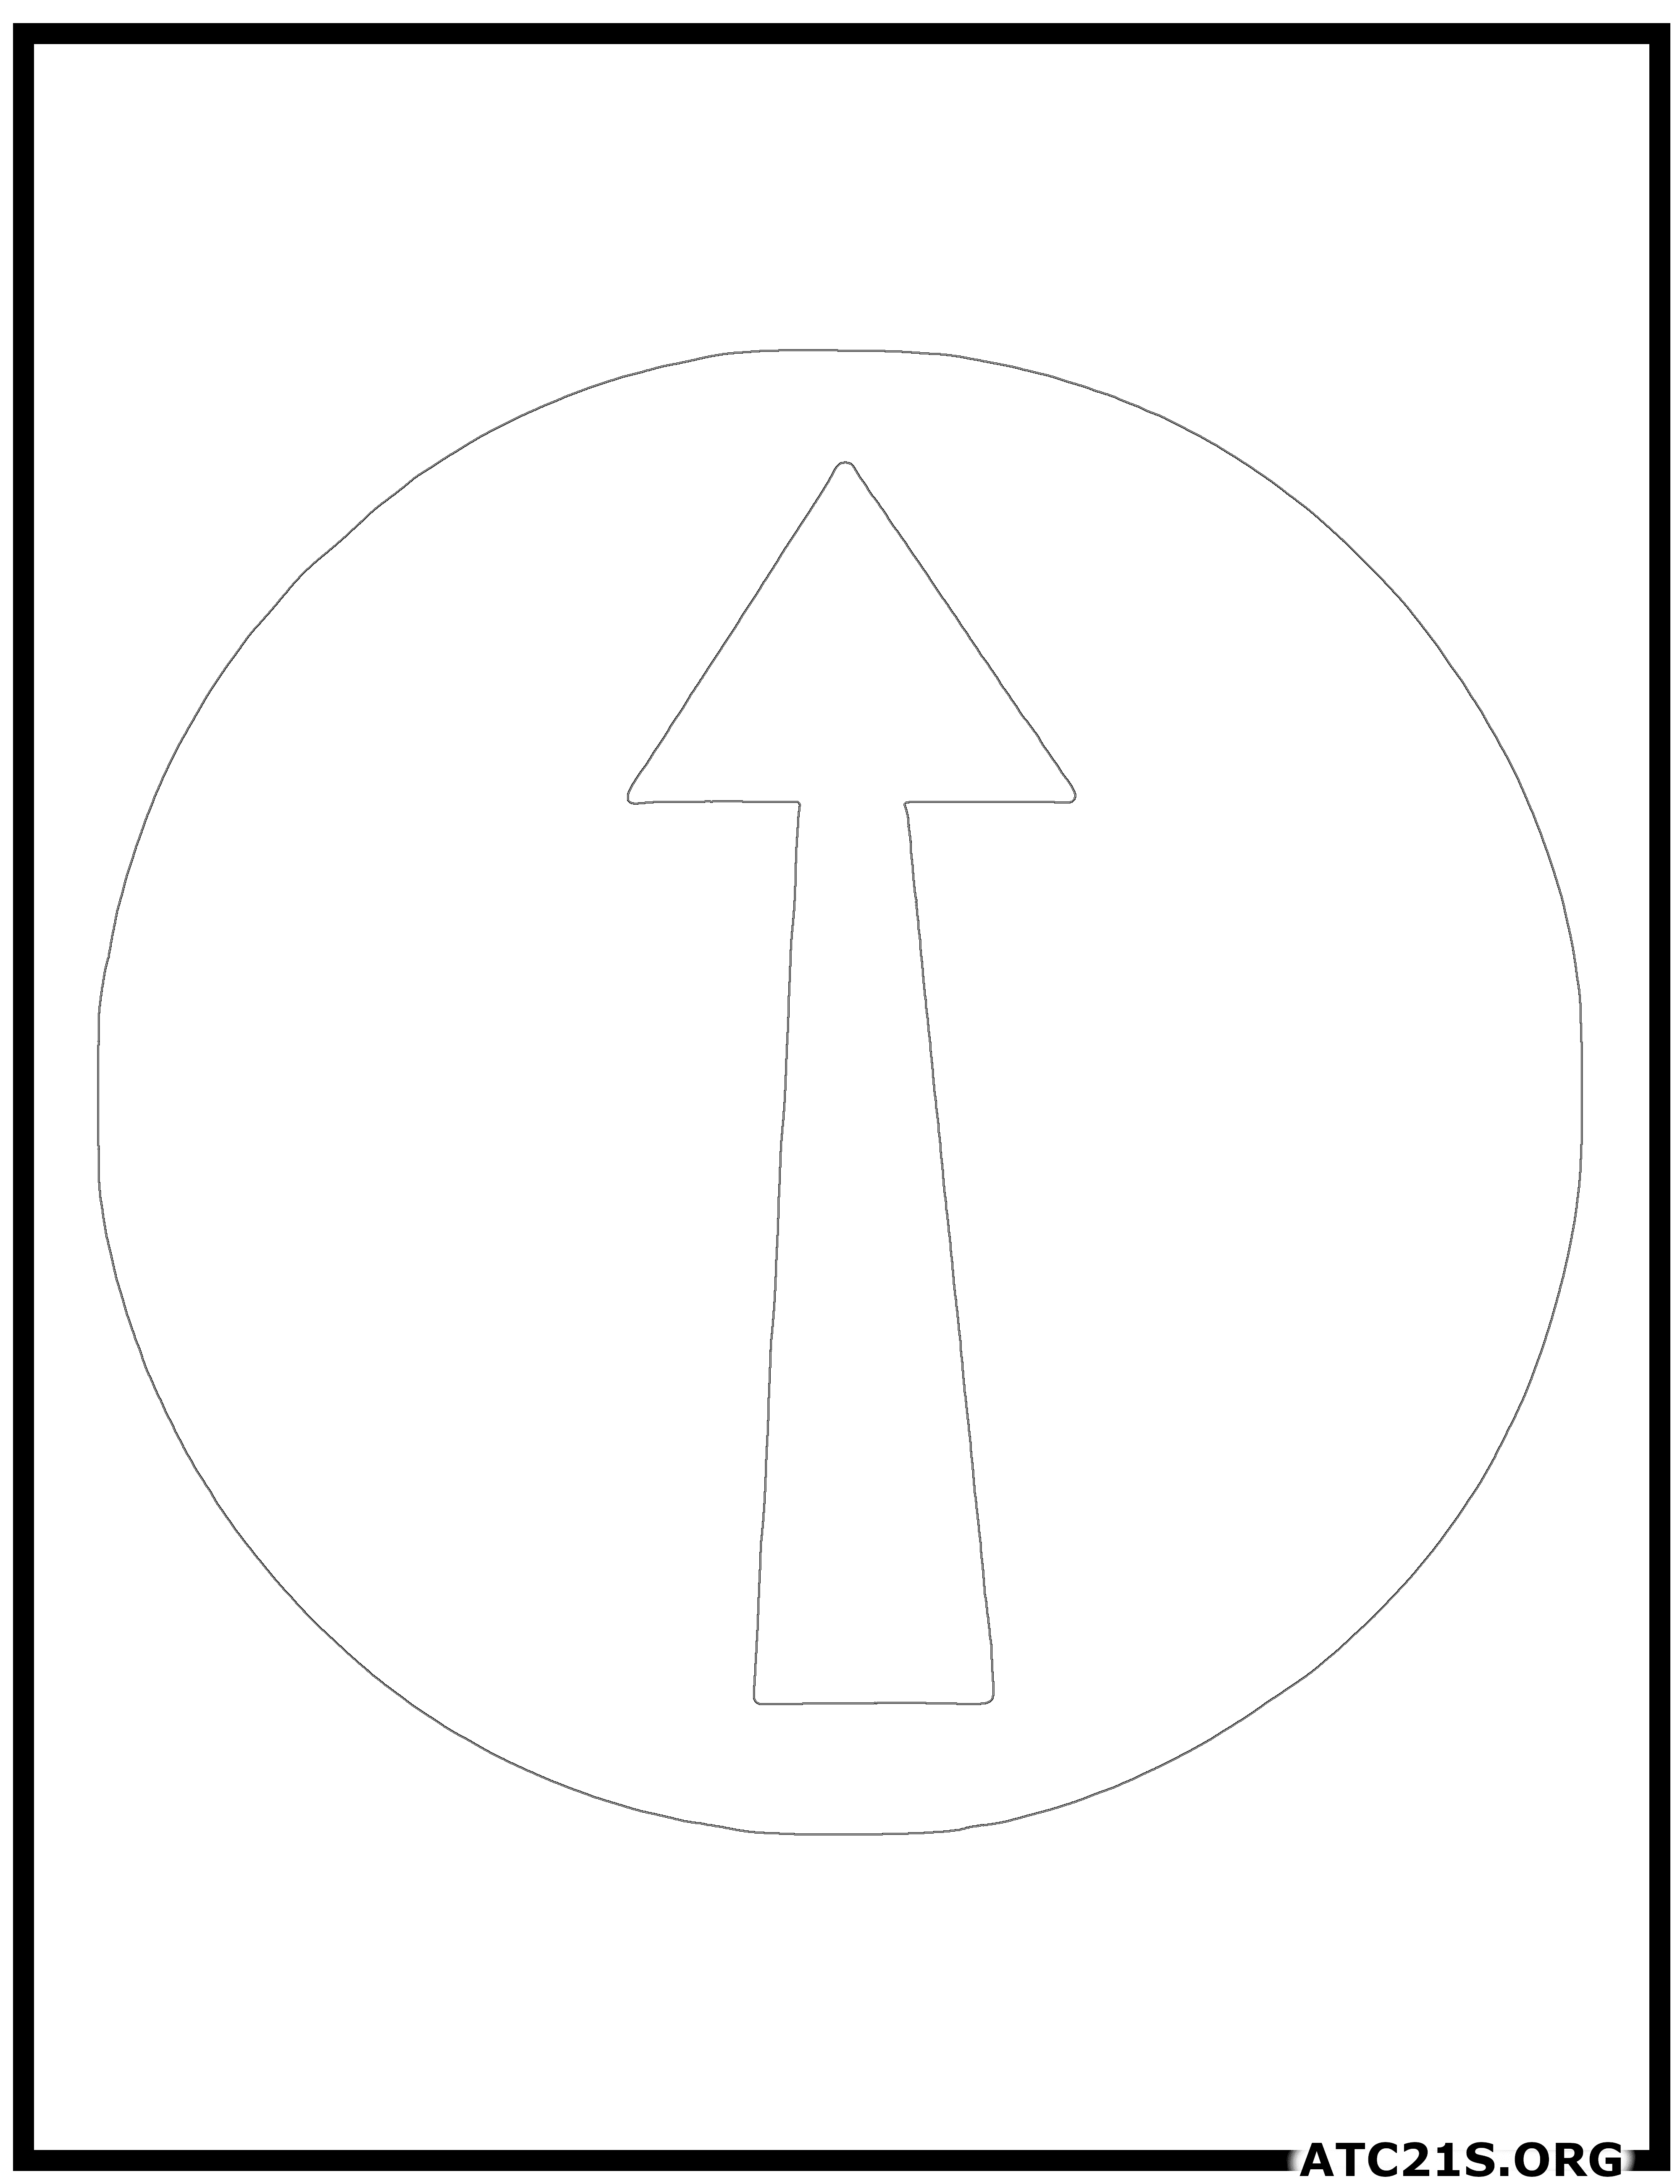 Ahead-traffic-sign-coloring-page